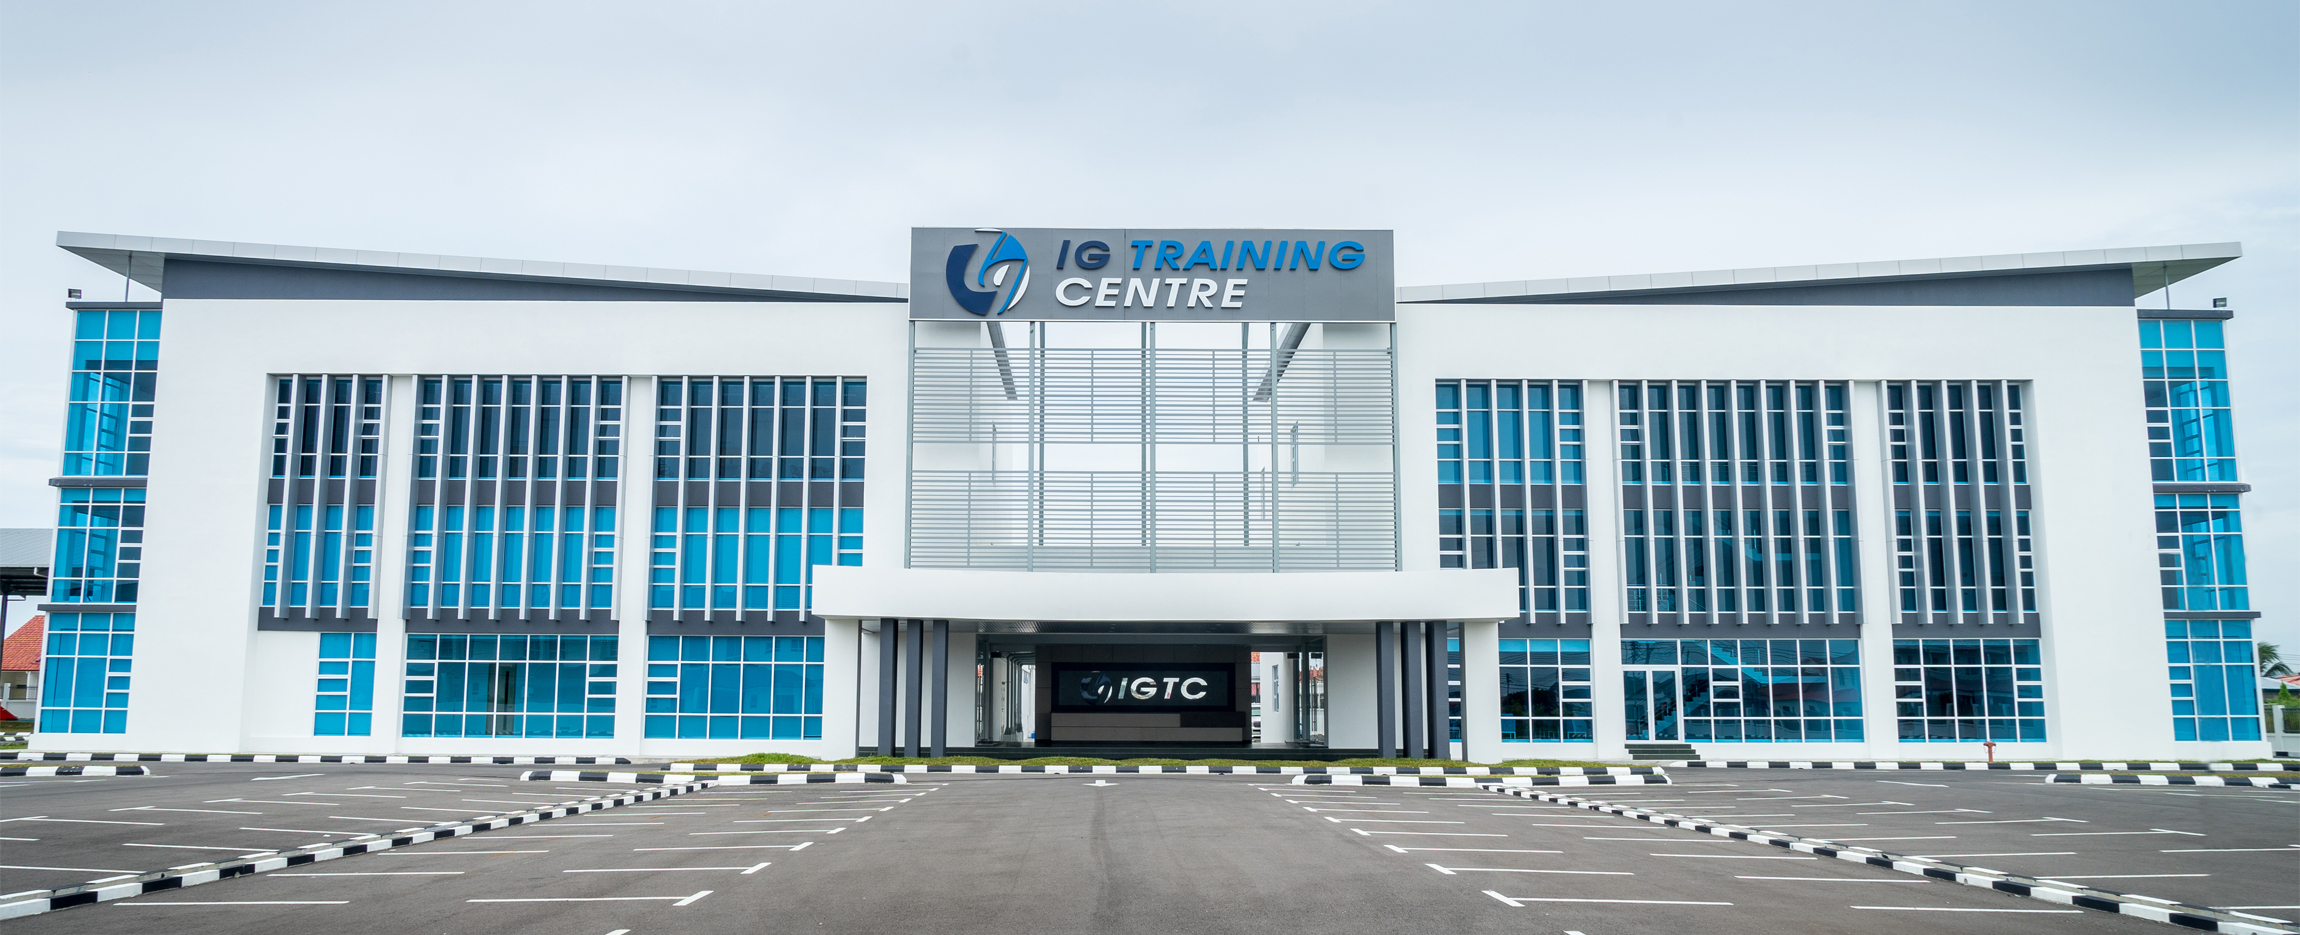 Welcome To IG Training Centre